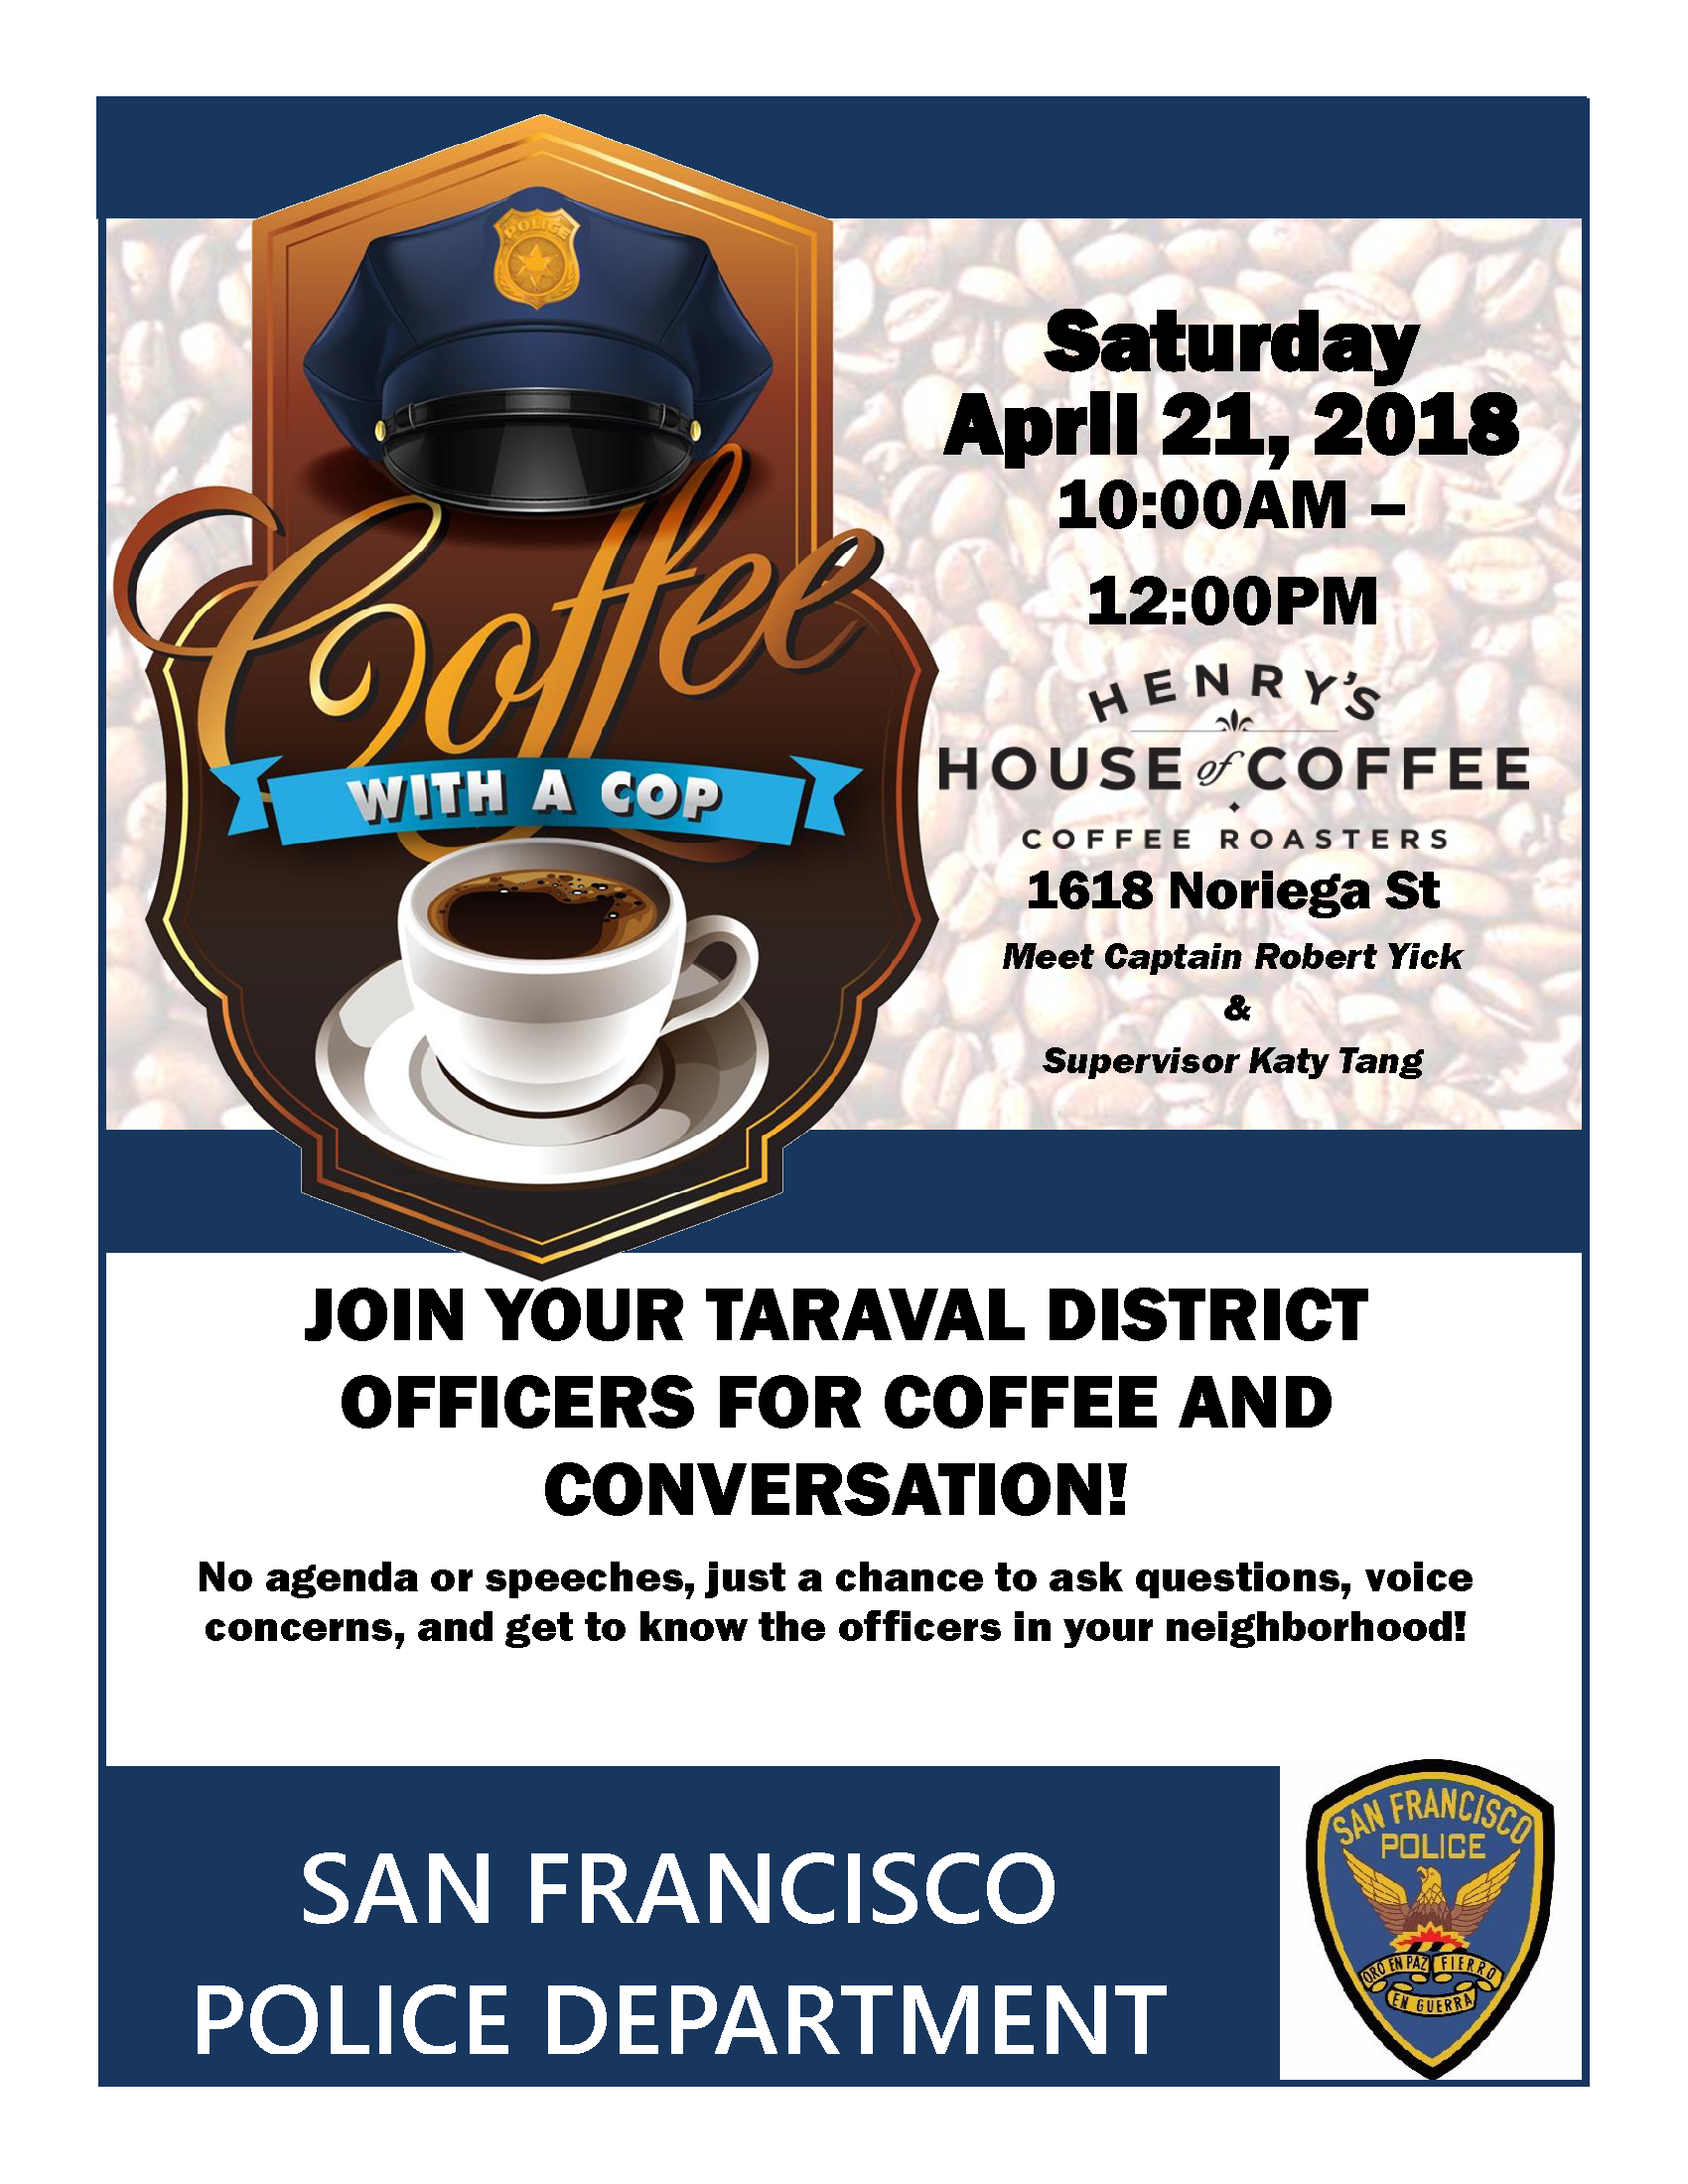 Coffee with a cop flyer Henry House of Coffee